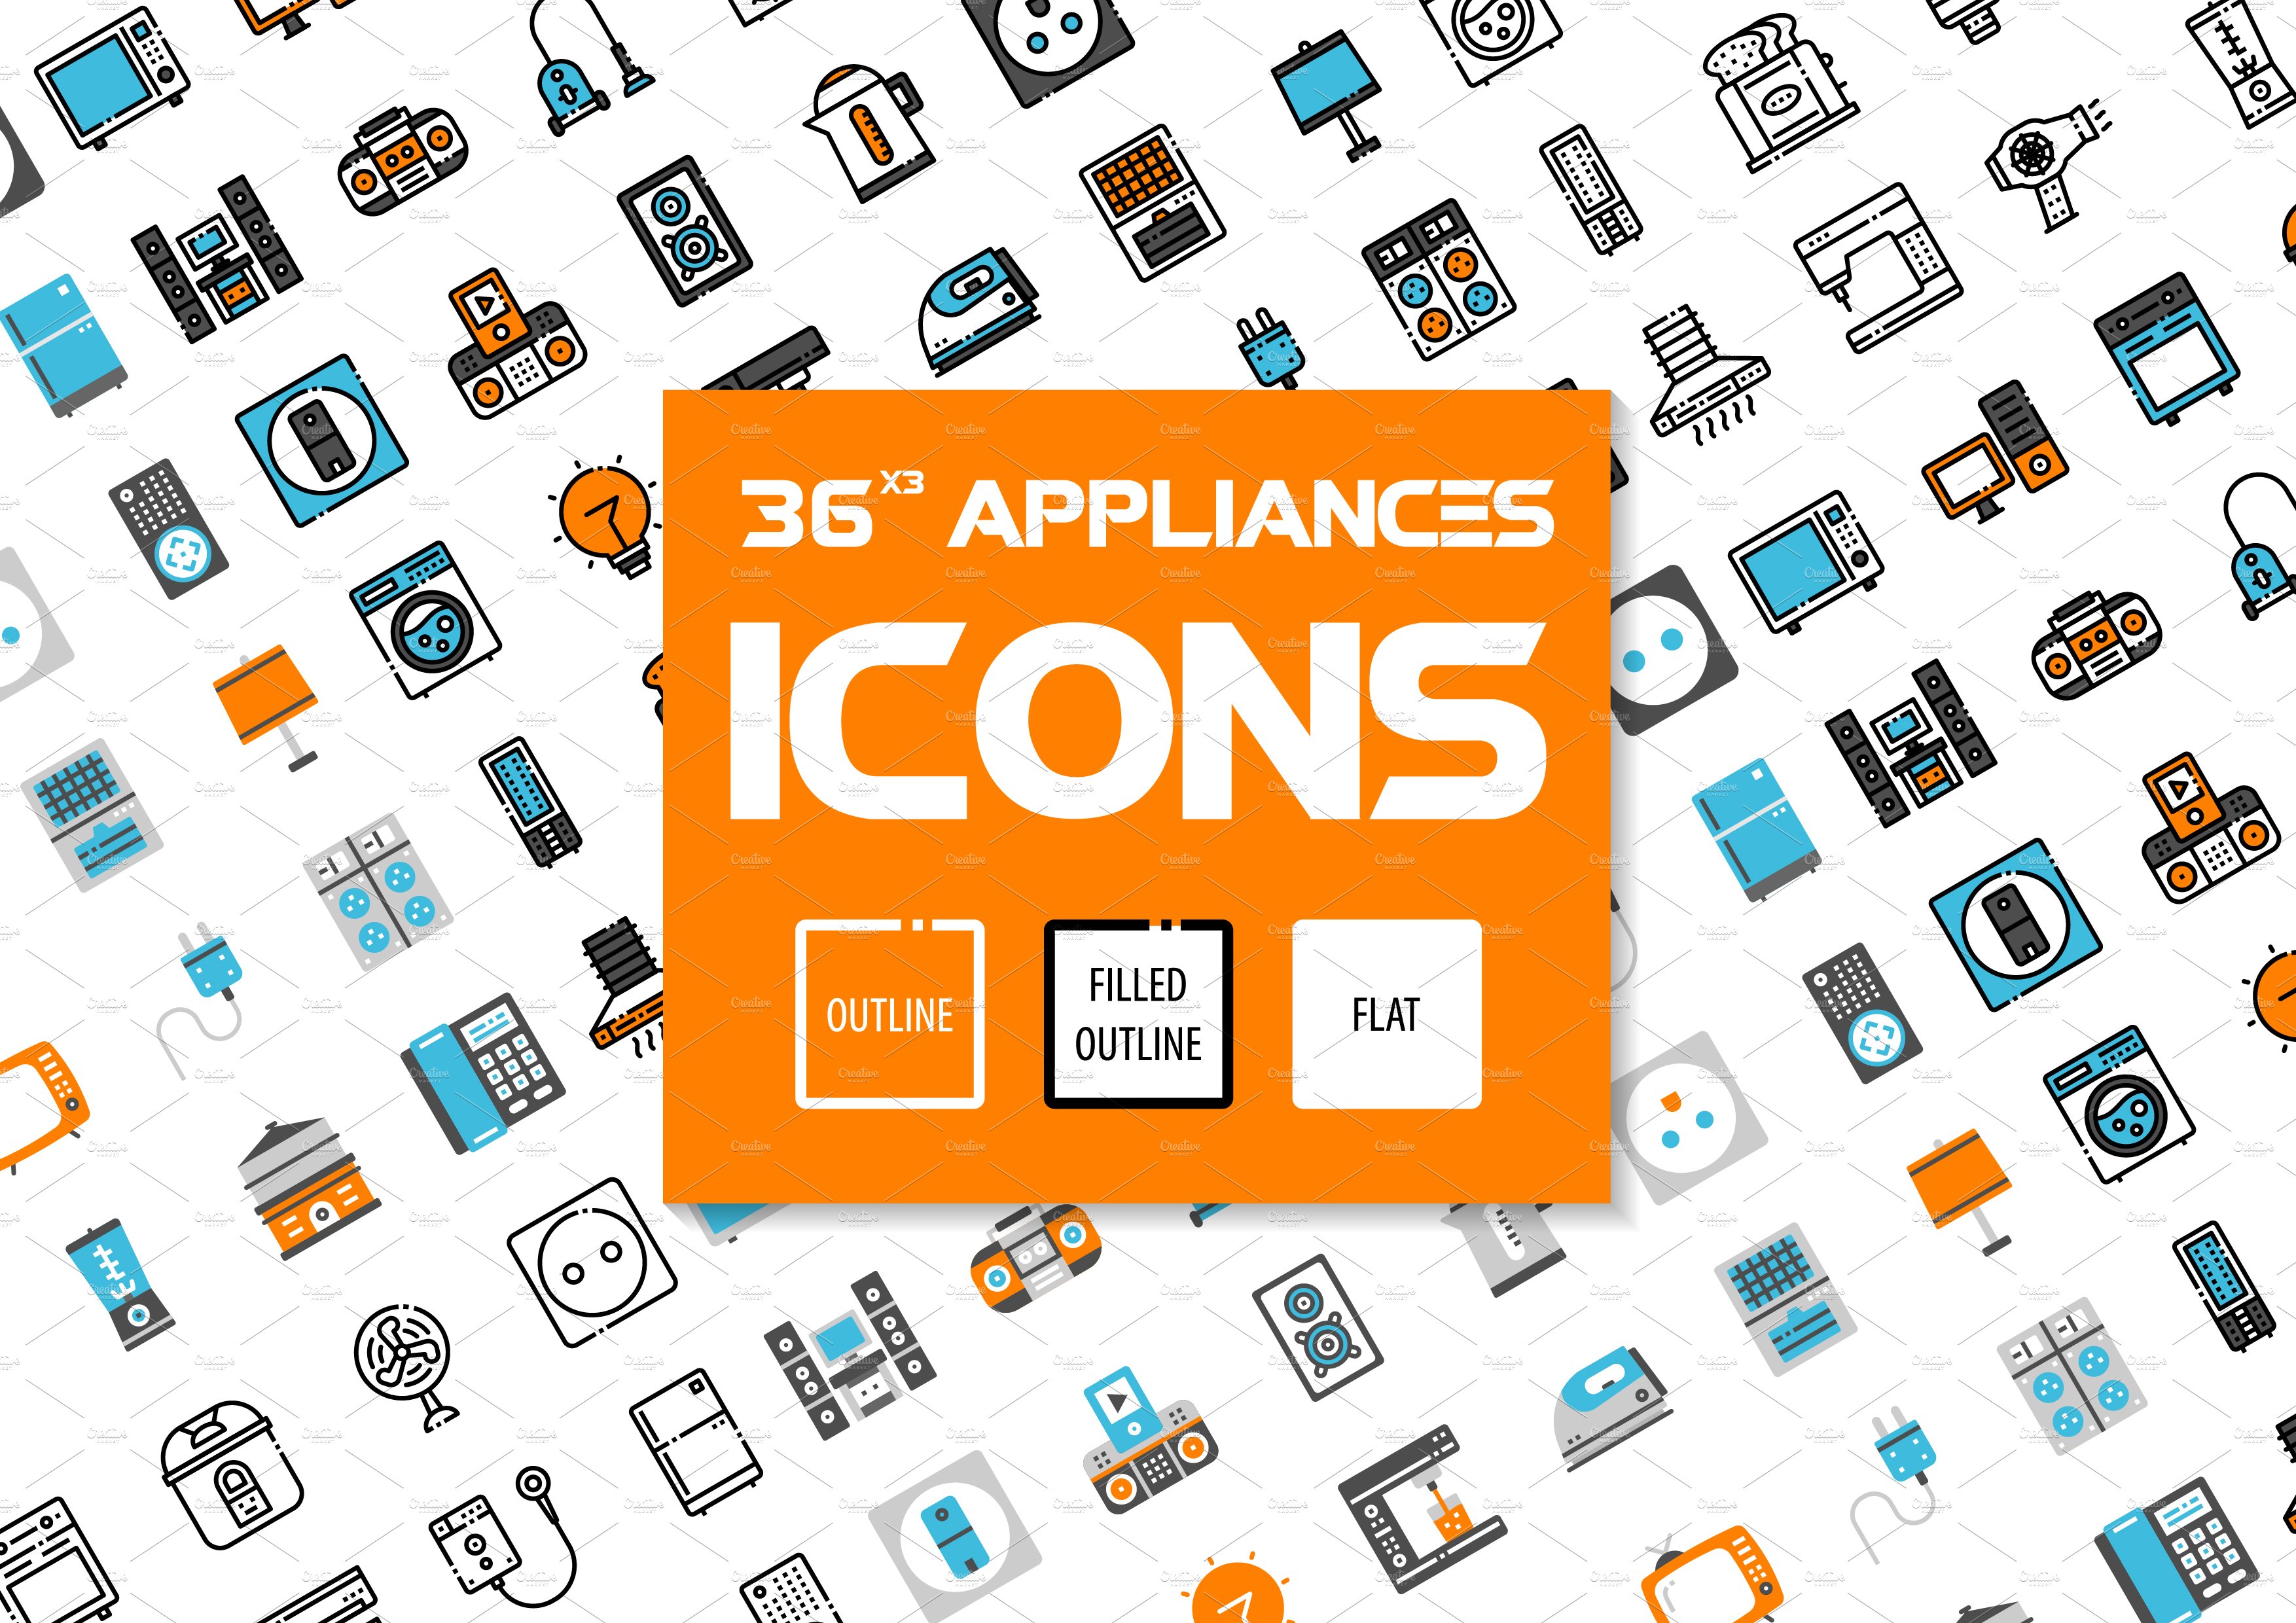 36x3 Home appliances icons cover image.